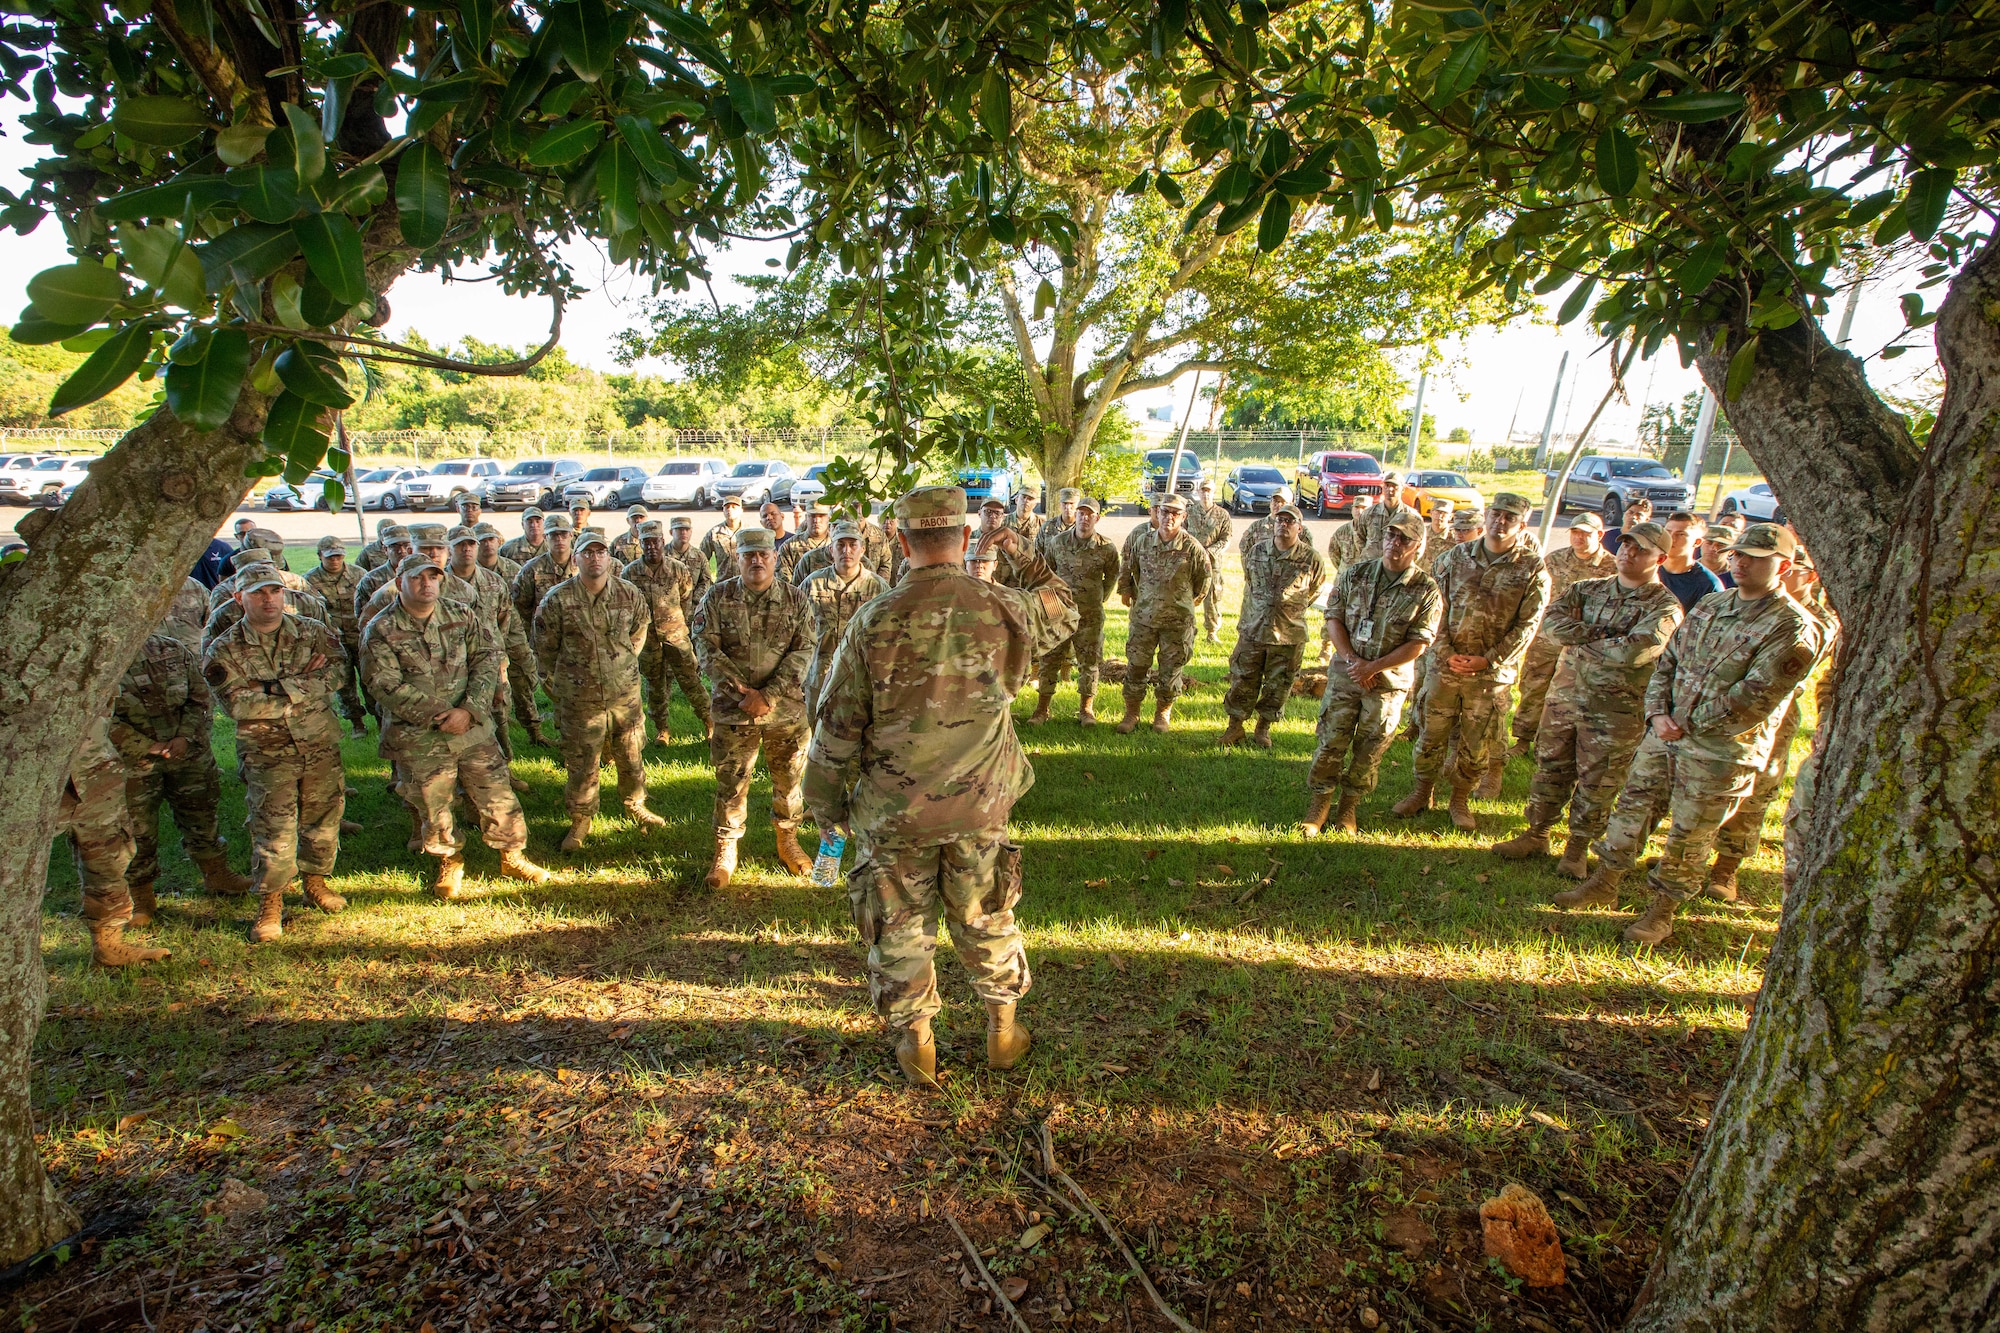 U.S. Air Force Brig. Gen. Humberto Pabon Jr., assistant adjutant general-air, Puerto Rico Air National Guard, addresses Airmen assigned to the 141st Air Control Squadron during a regular schedule drill, Aguadilla, Puerto Rico, Oct. 15, 2023. Pabon spoke about his leadership philosophy emphasizing respect, professionalism, and empowerment. (U.S. Air National Guard photo by Tech. Sgt. Josué Rivera)